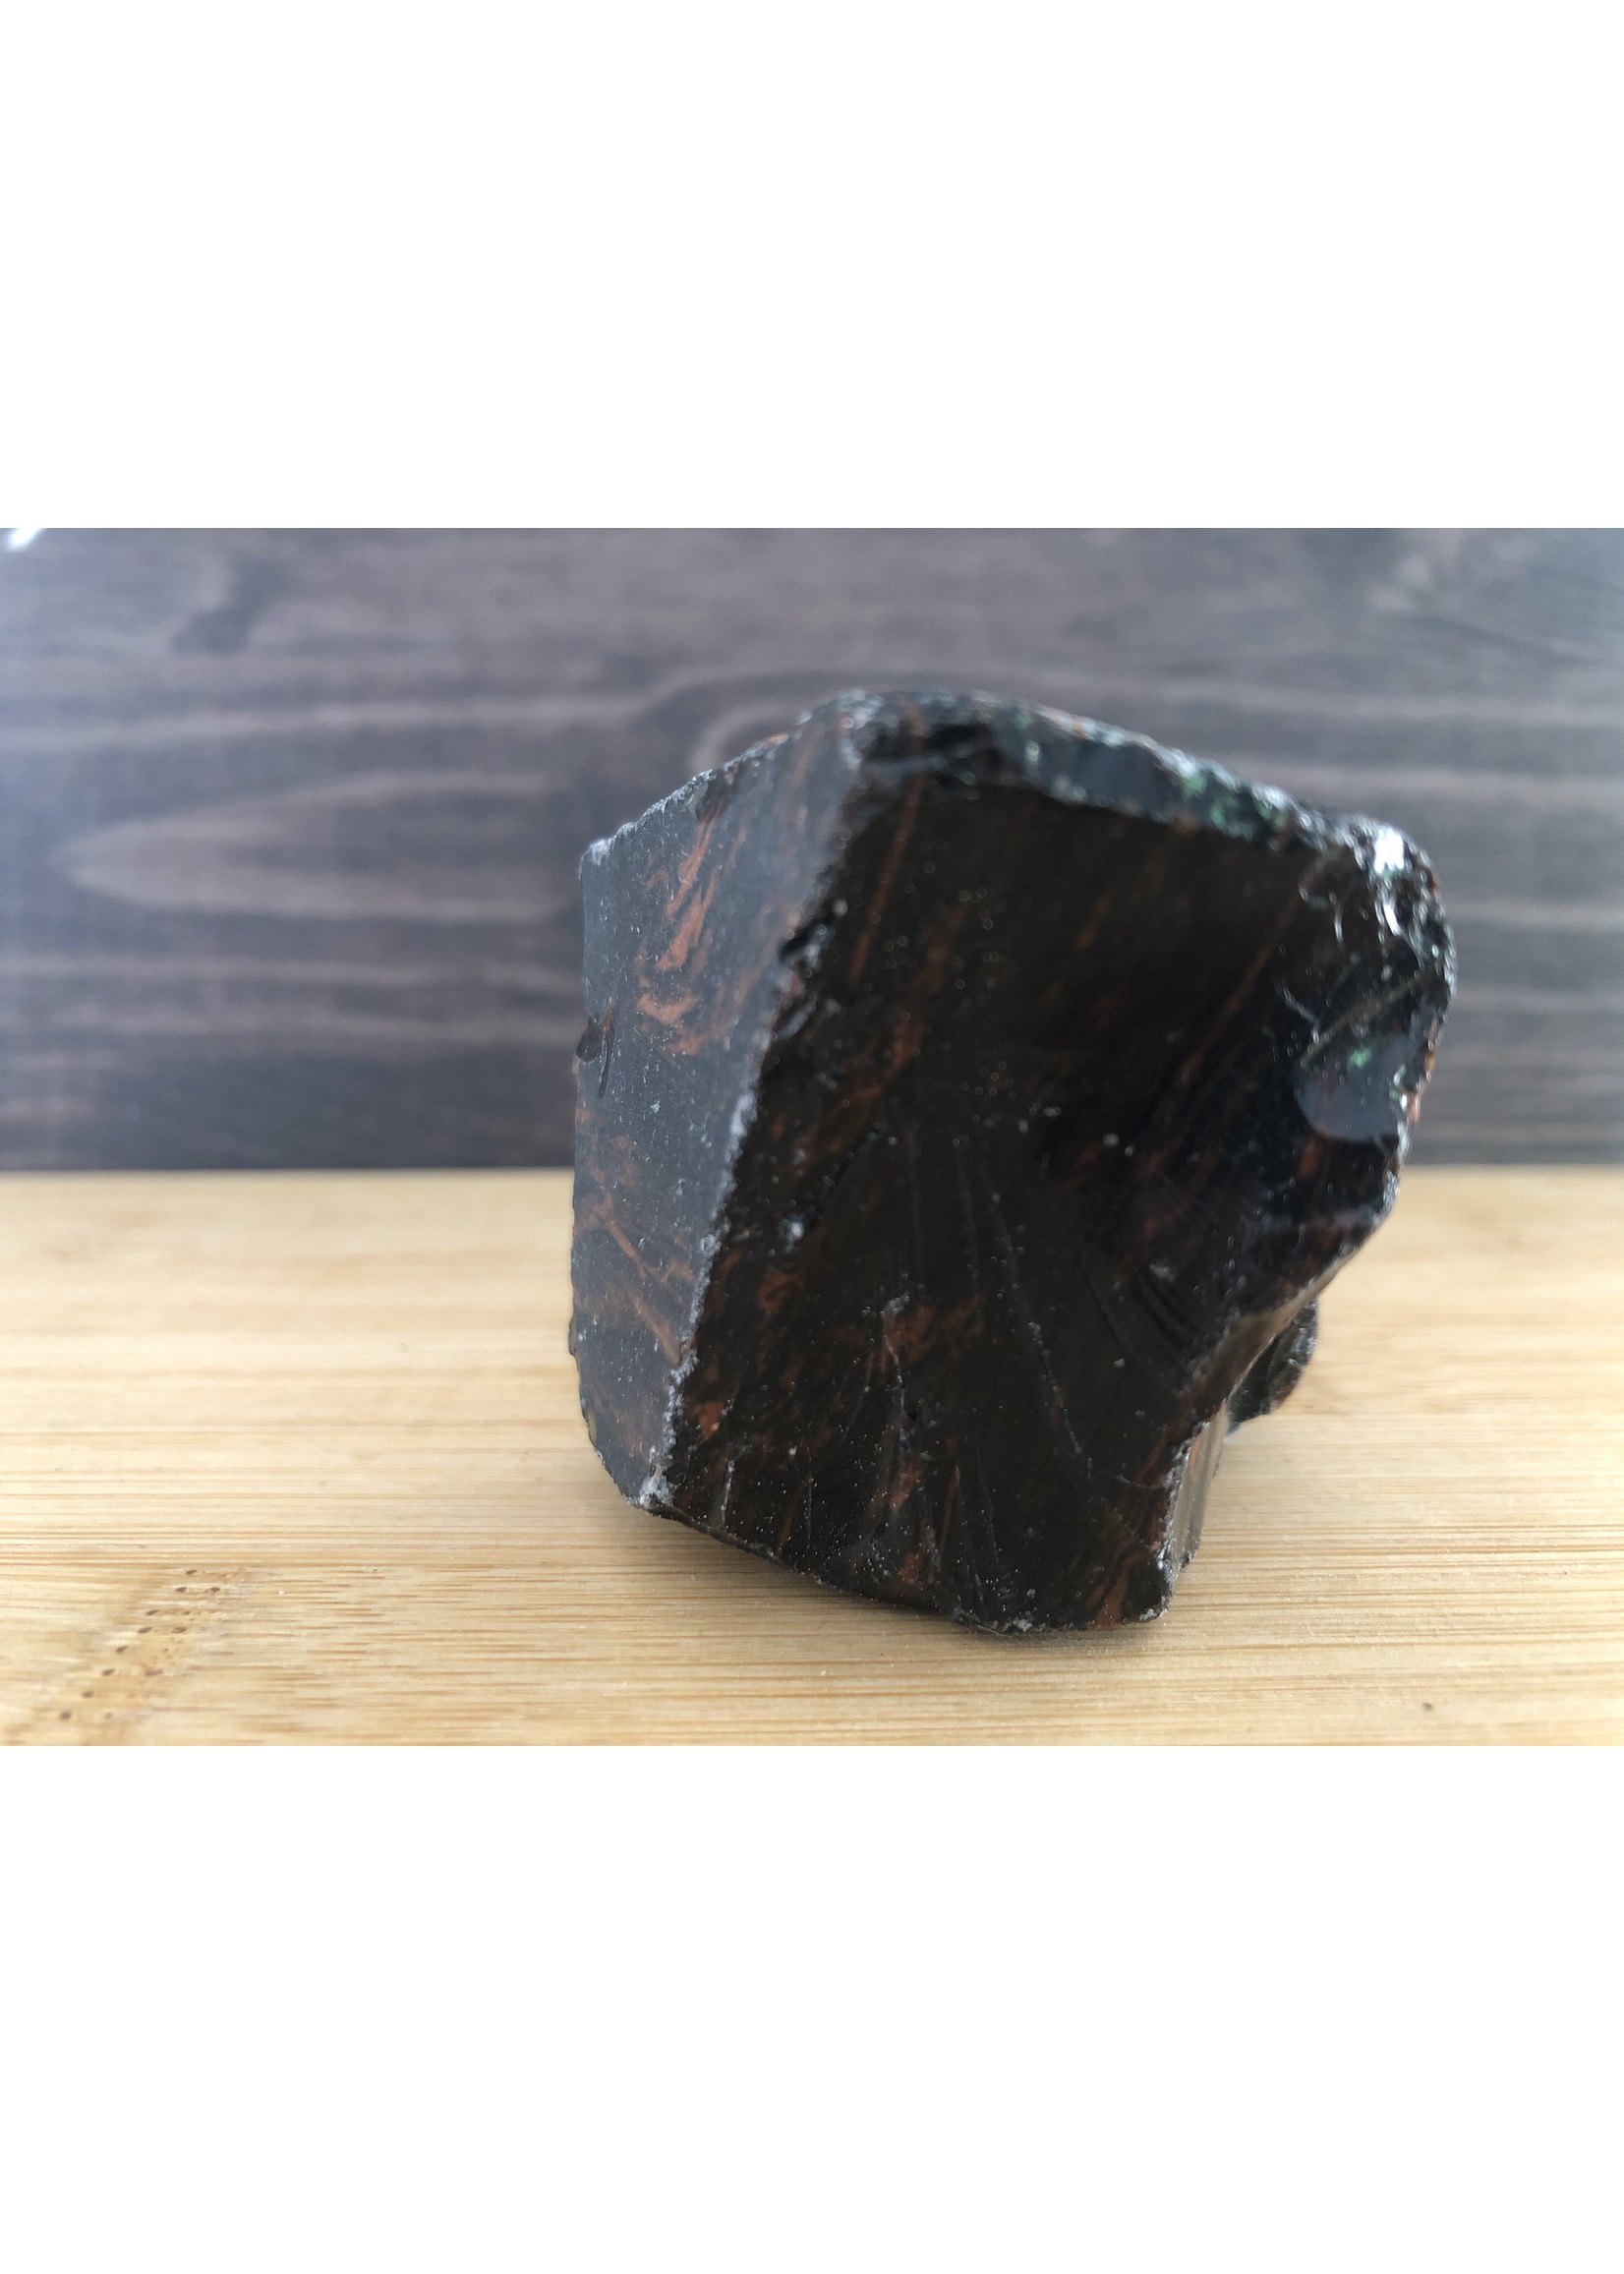 beautiful mahogany obsidian polished, used to relieve various types of pain such as muscle aches or cramps